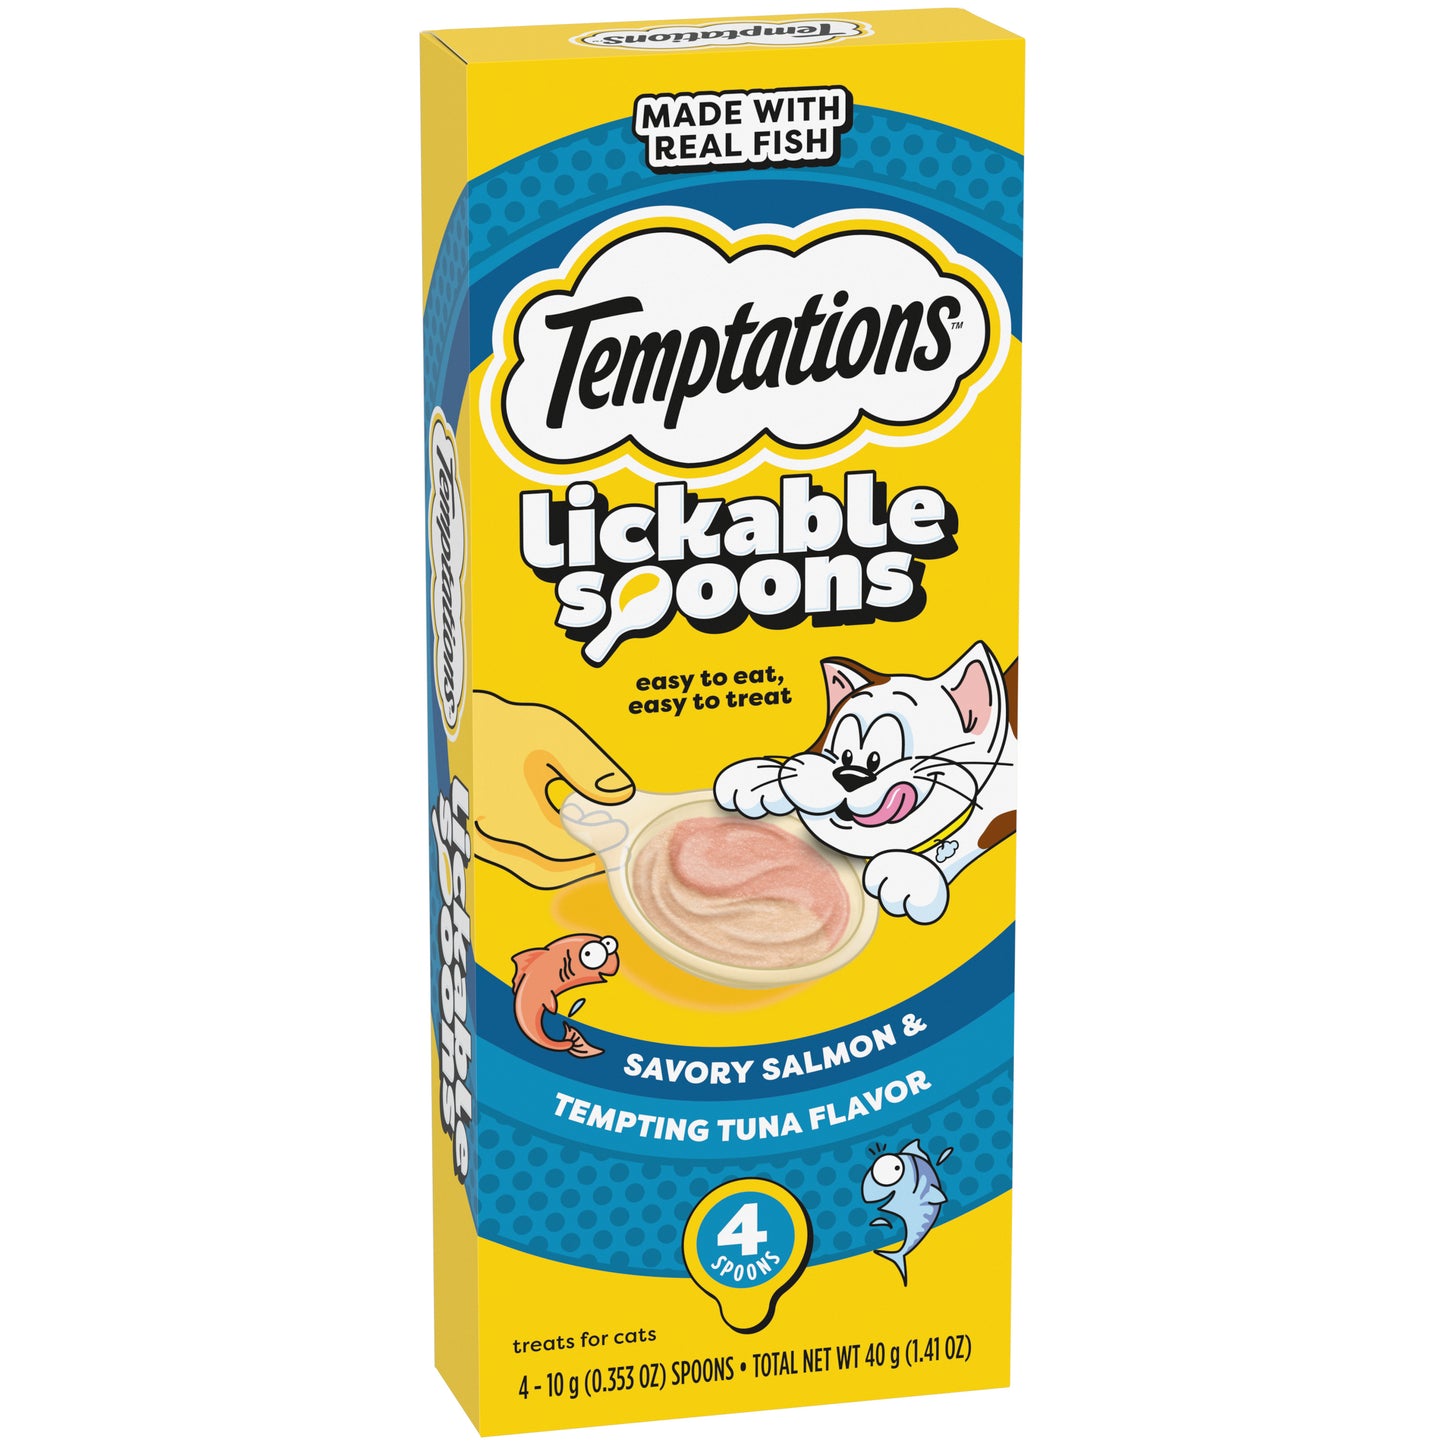 [Temptations][Temptations Lickable Spoons, Savory Salmon and Tempting Tuna Flavor, Pack of 4][Image Center Left (3/4 Angle)]